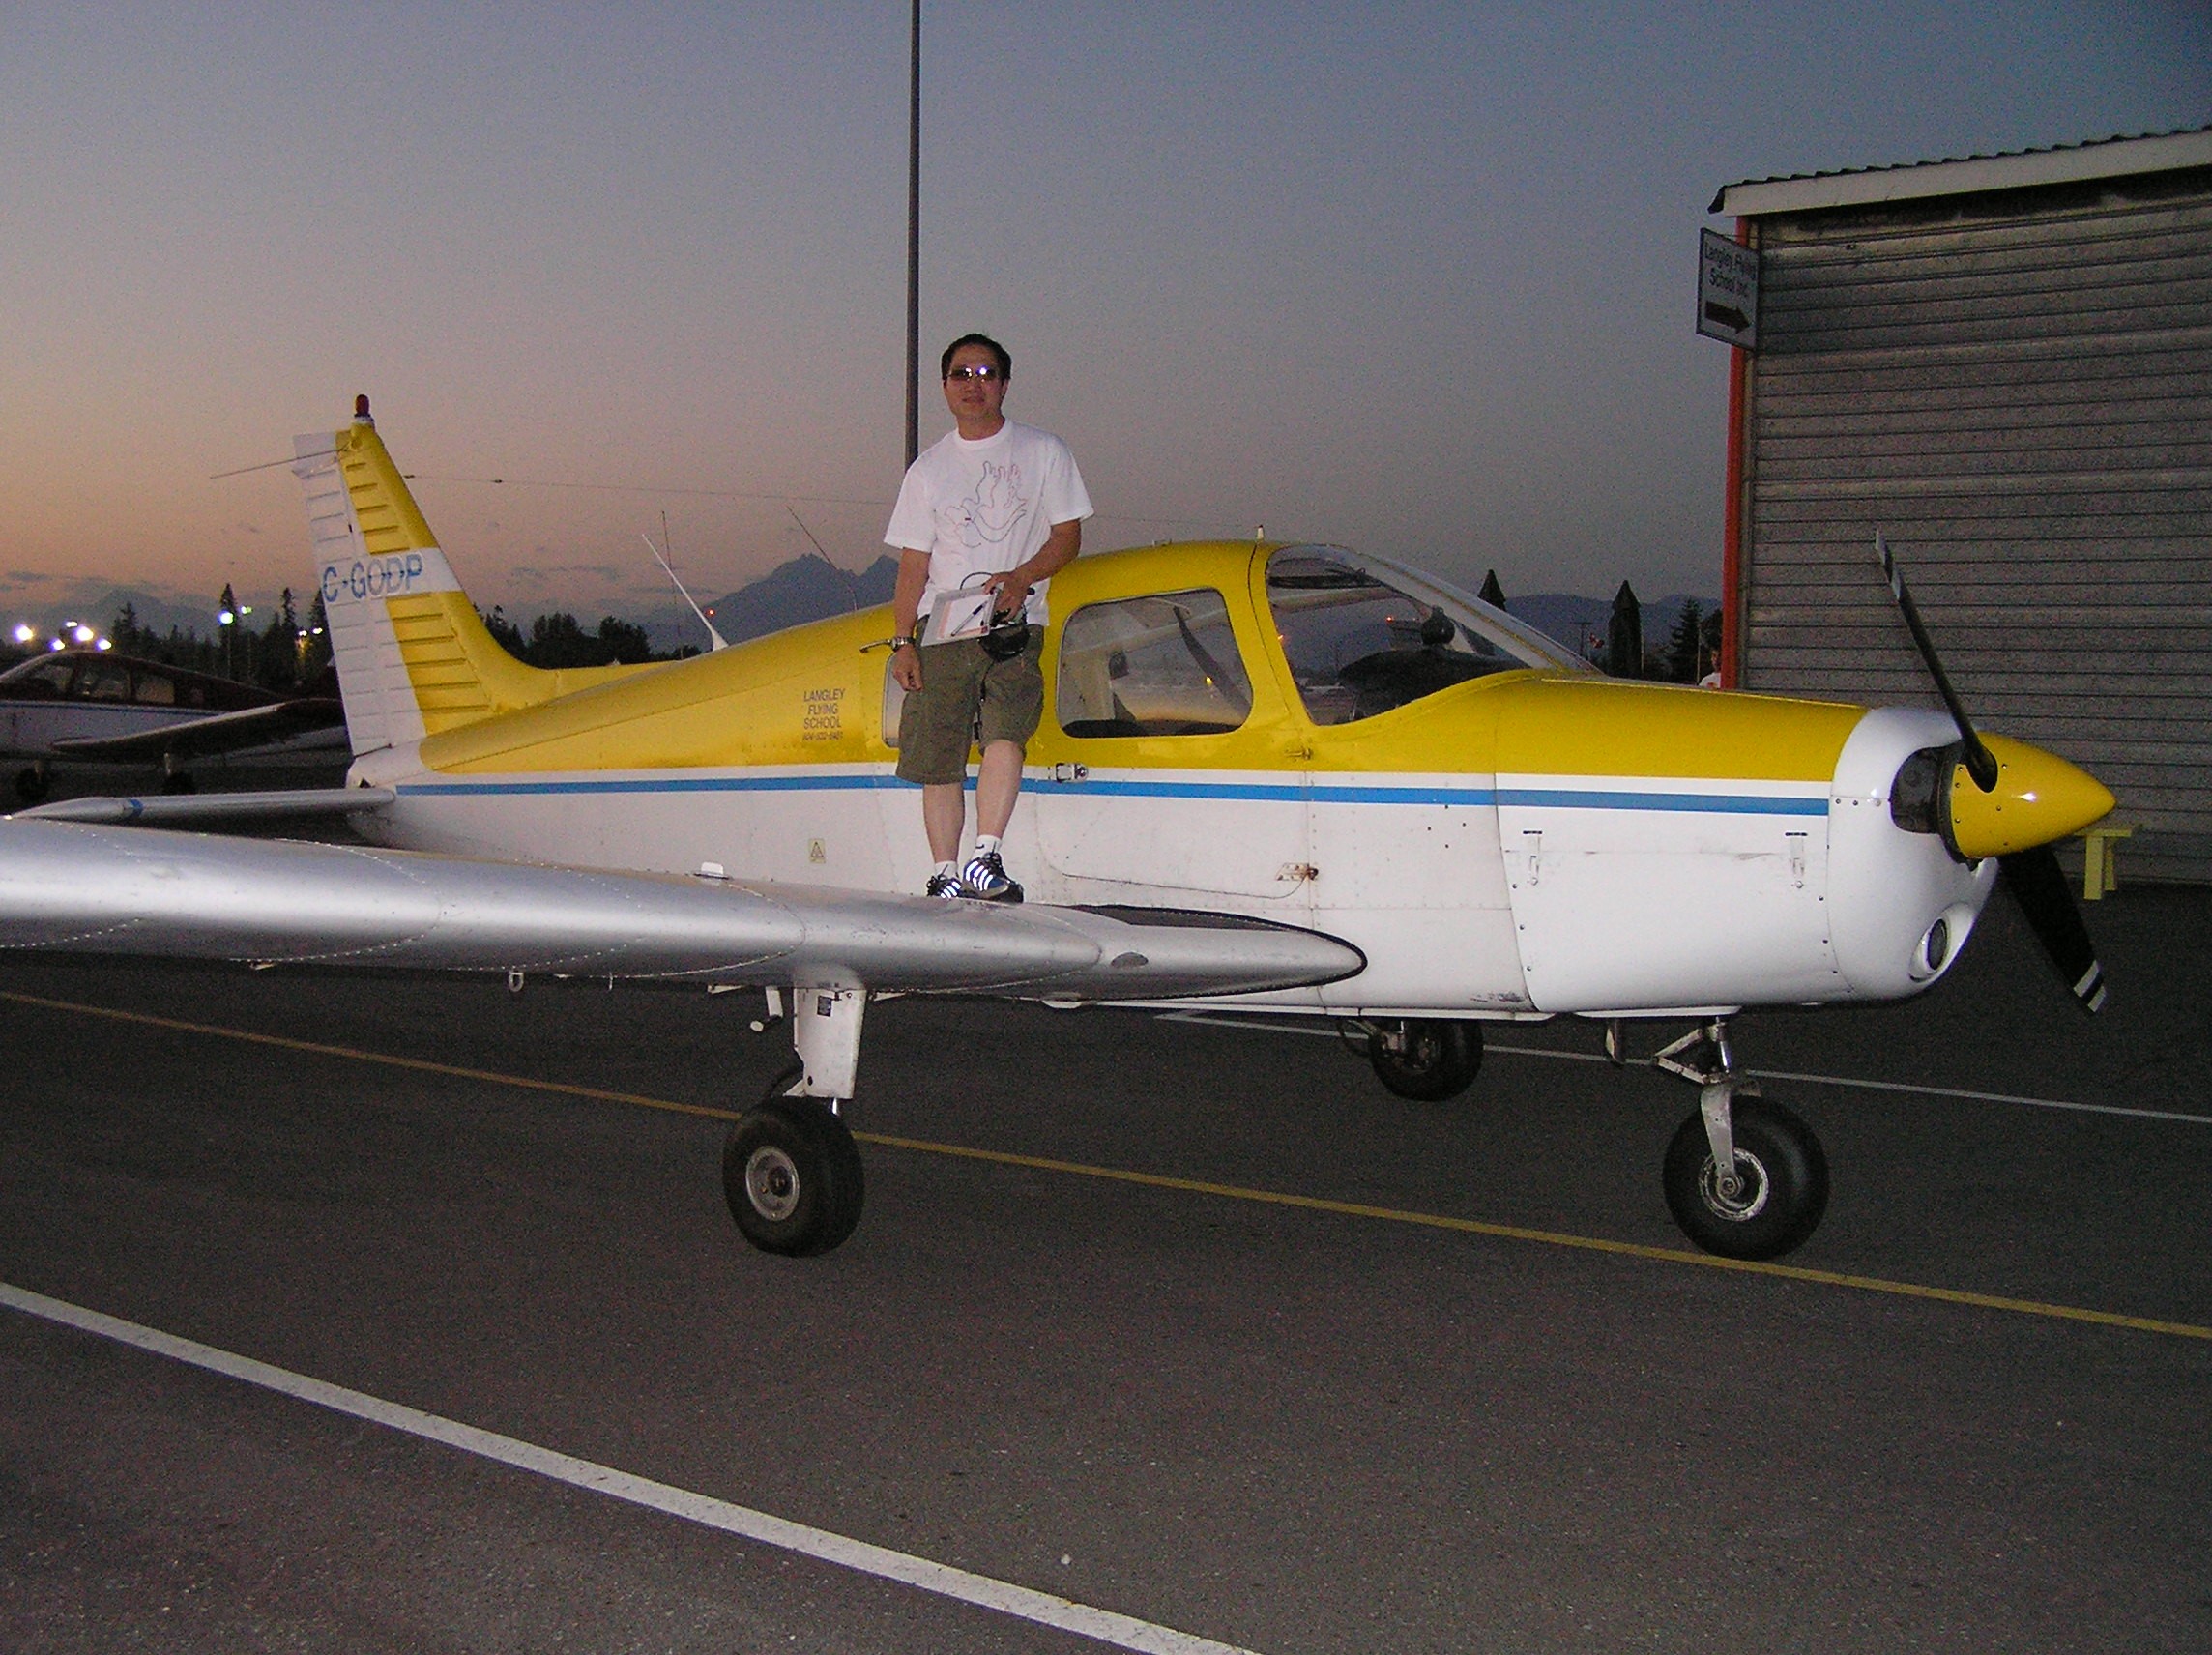 Frederick Yim after completing his First Solo Flight in Cherokee GODP on August 26, 2006, Langley Flying School.